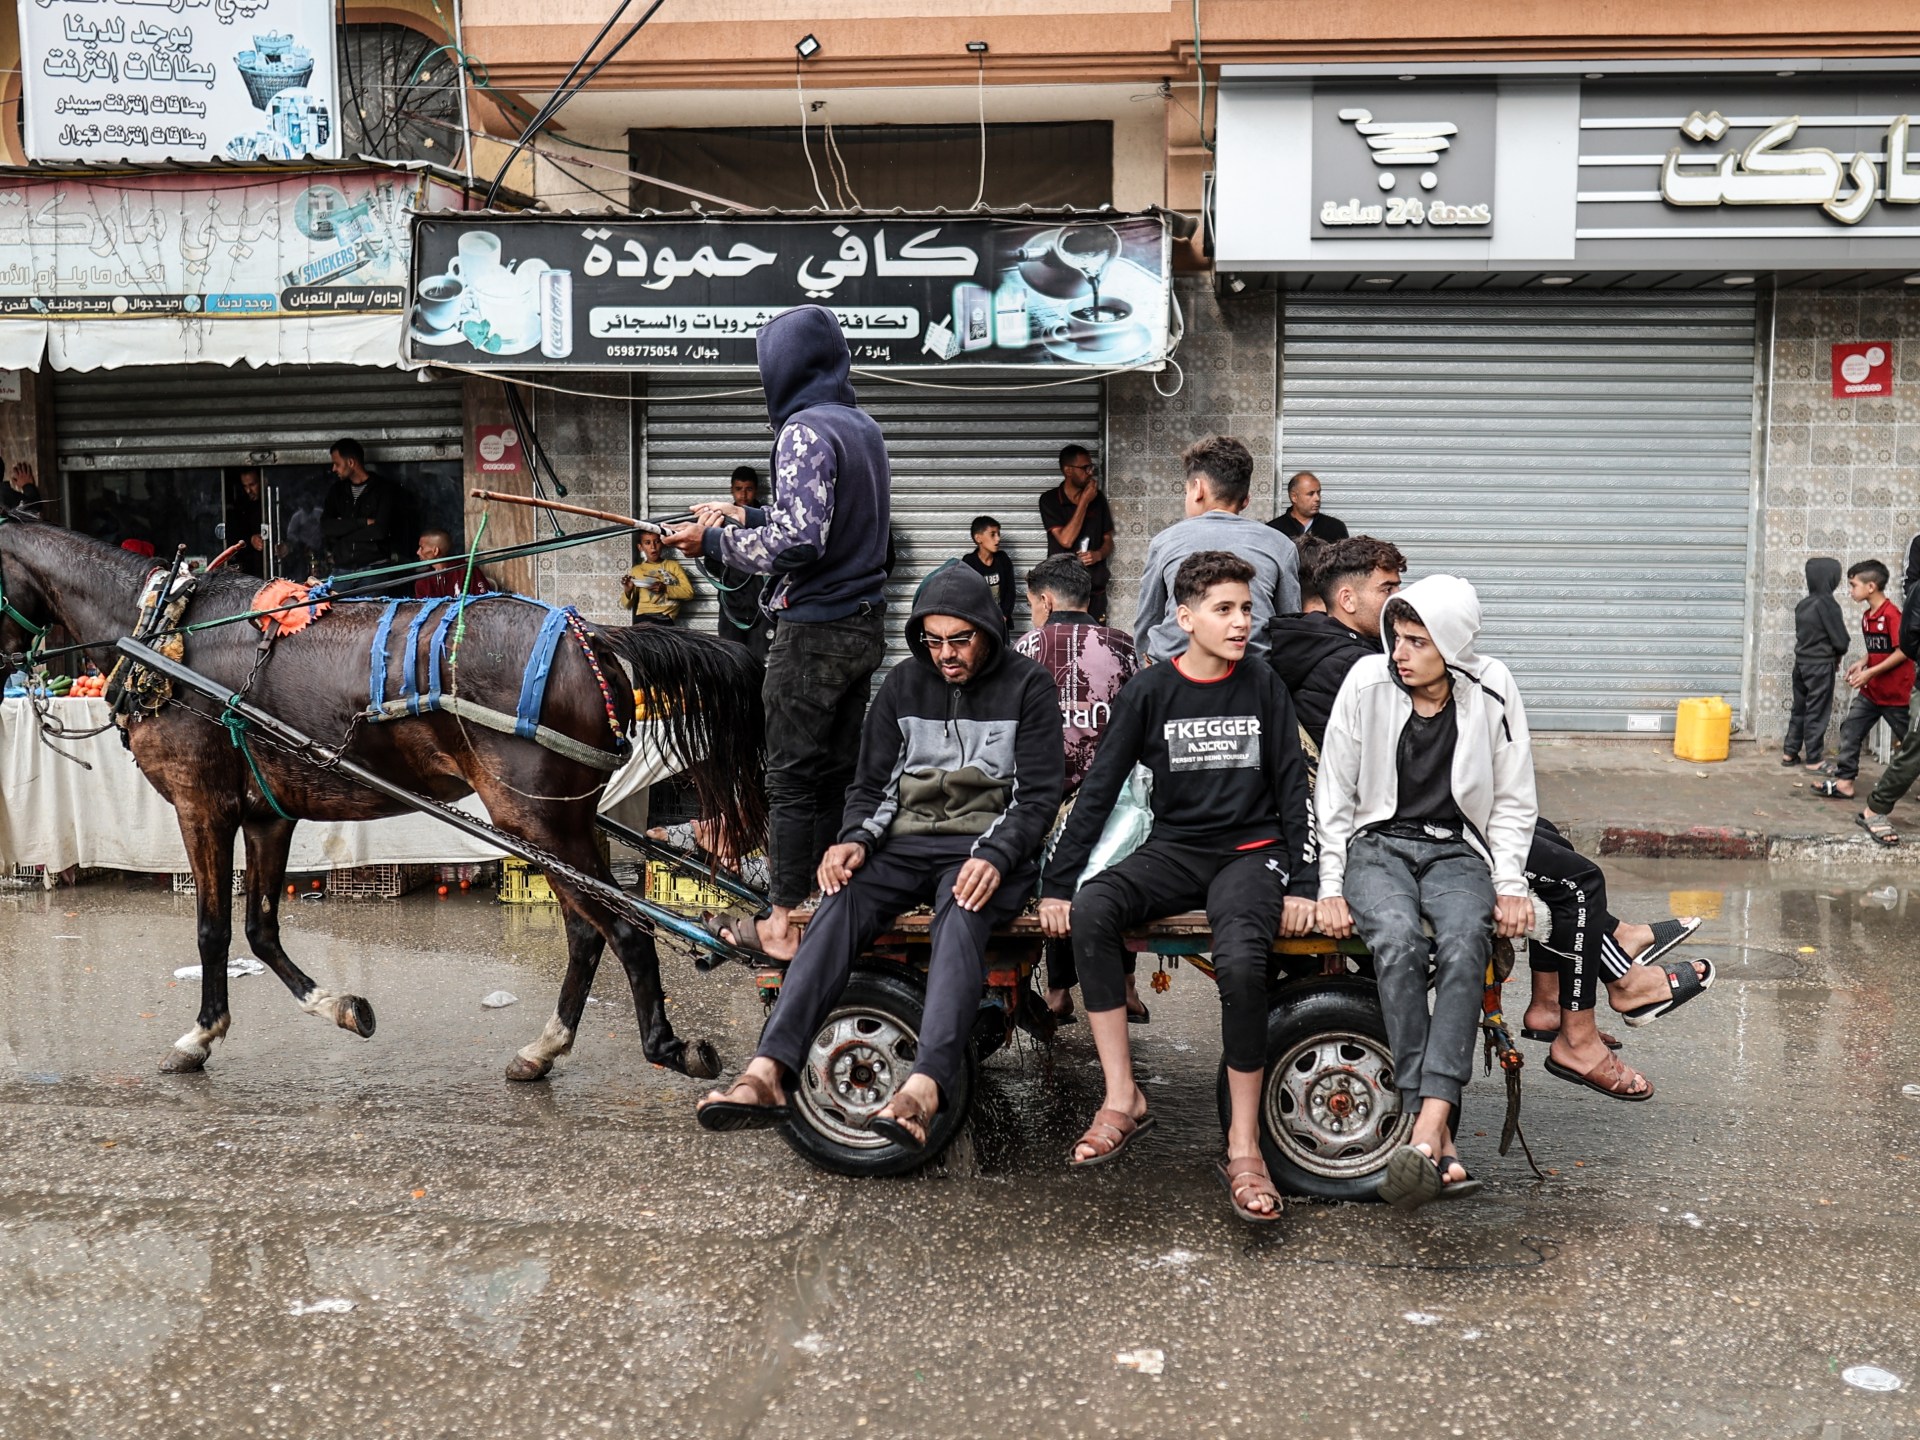 Rainfall in Gaza worsens conditions for displaced Palestinians | Israel-Palestine conflict #Rainfall #Gaza #worsens #conditions #displaced #Palestinians #IsraelPalestine #conflict